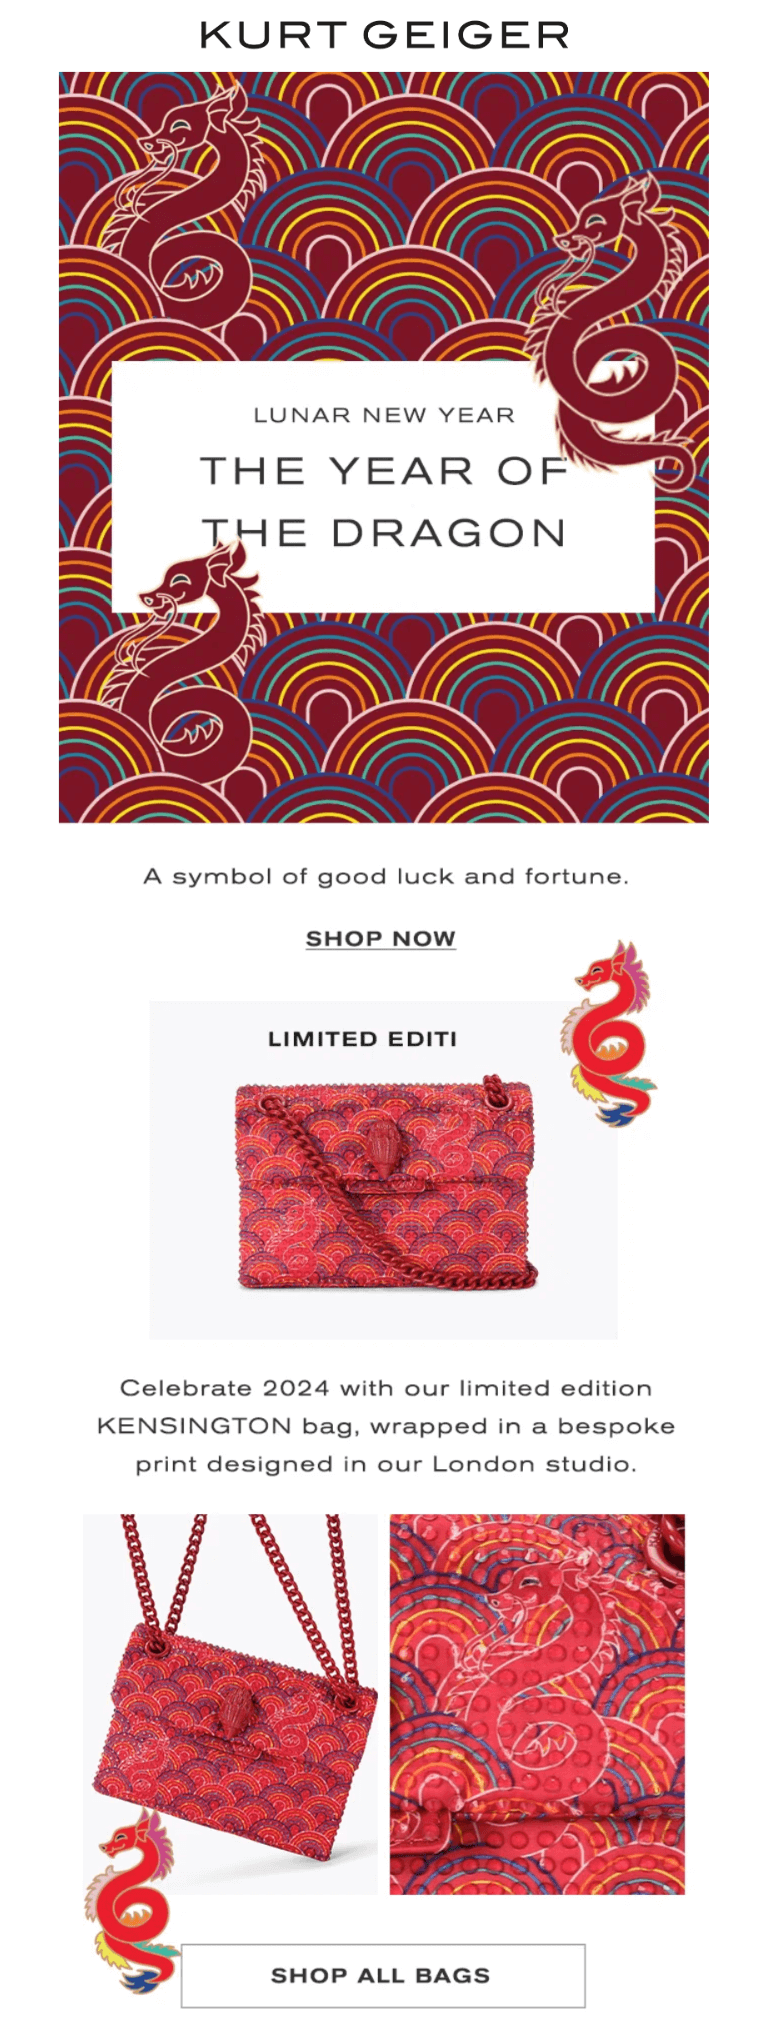 A Lunar New Year-themed email from Kurt Geiger incorporates waves and dragons into its design.